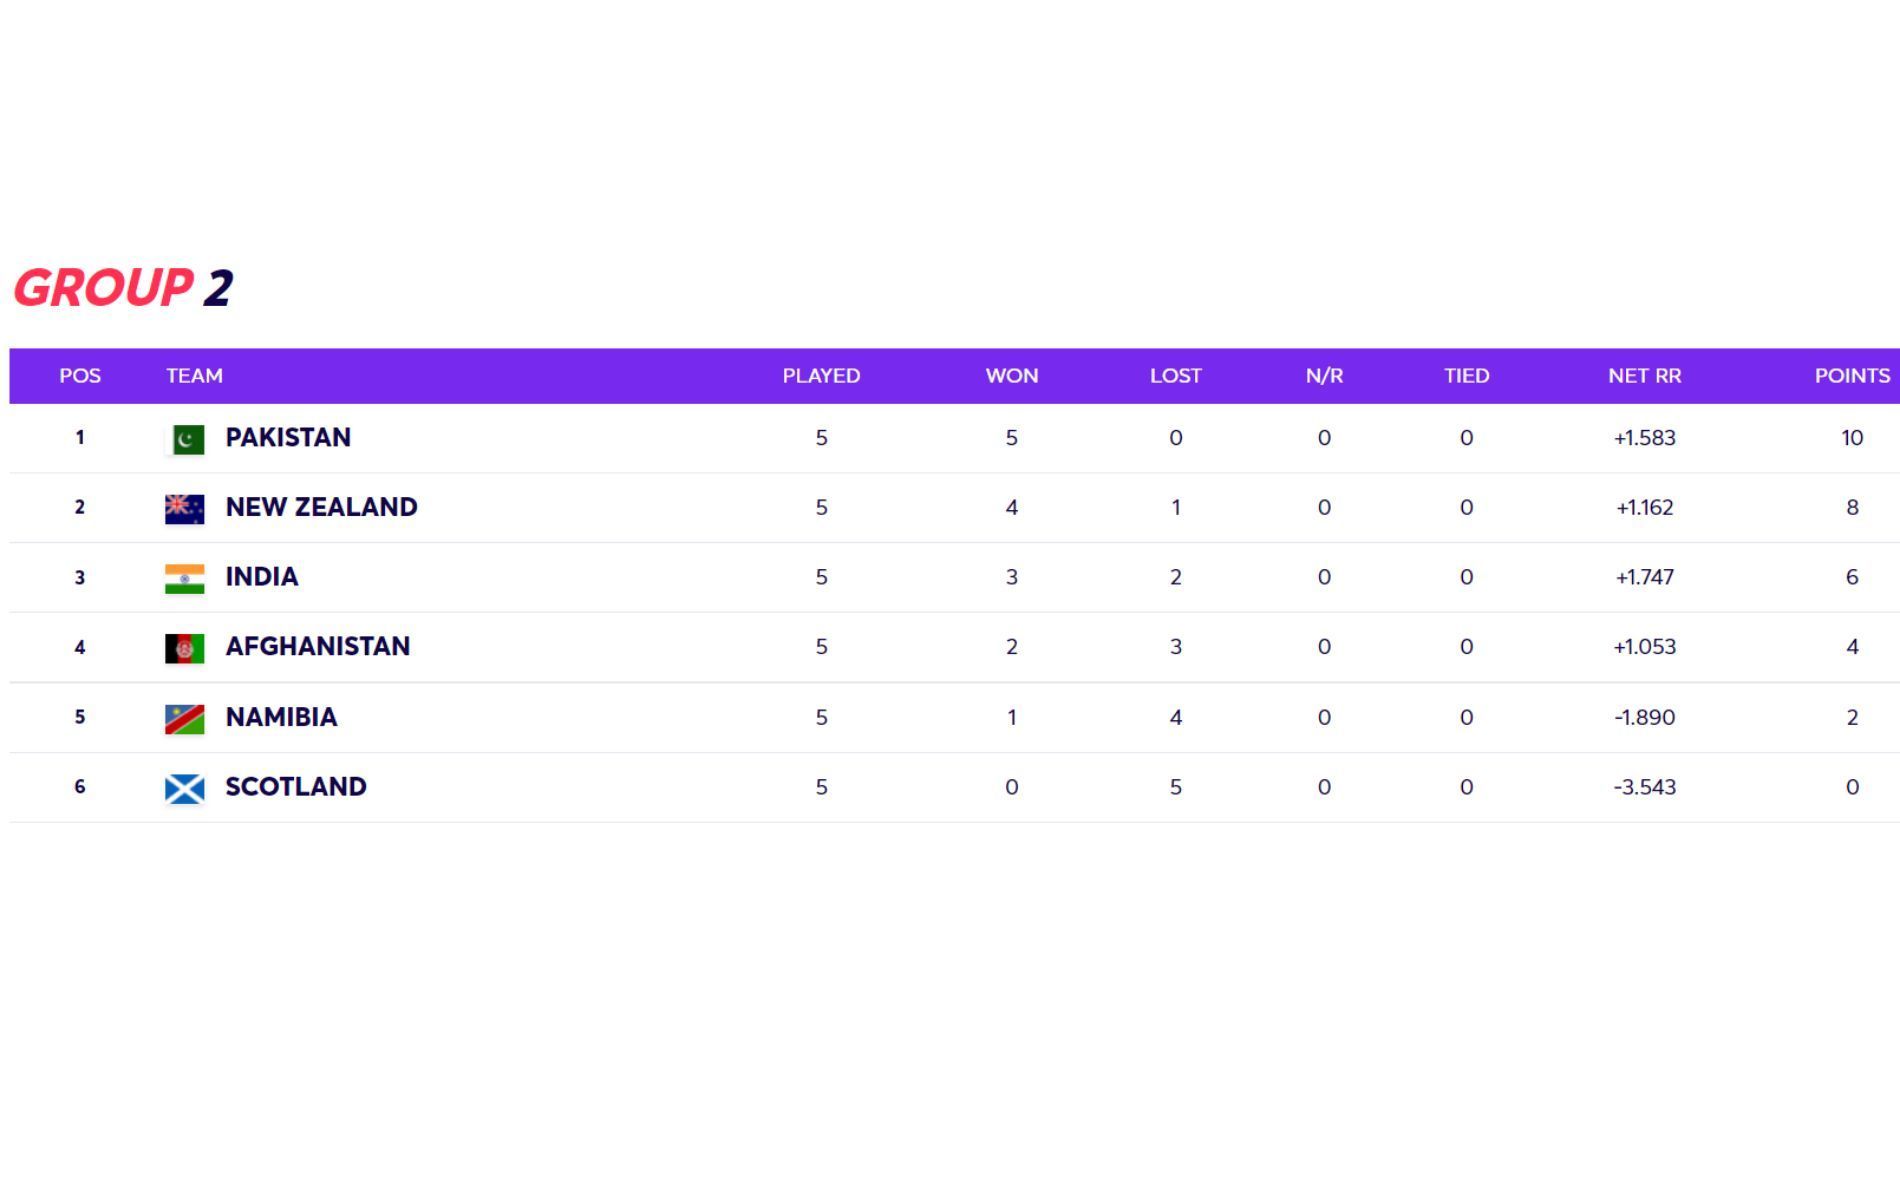 T20 World Cup 2021 Super 12 Group 2 points table final standings.